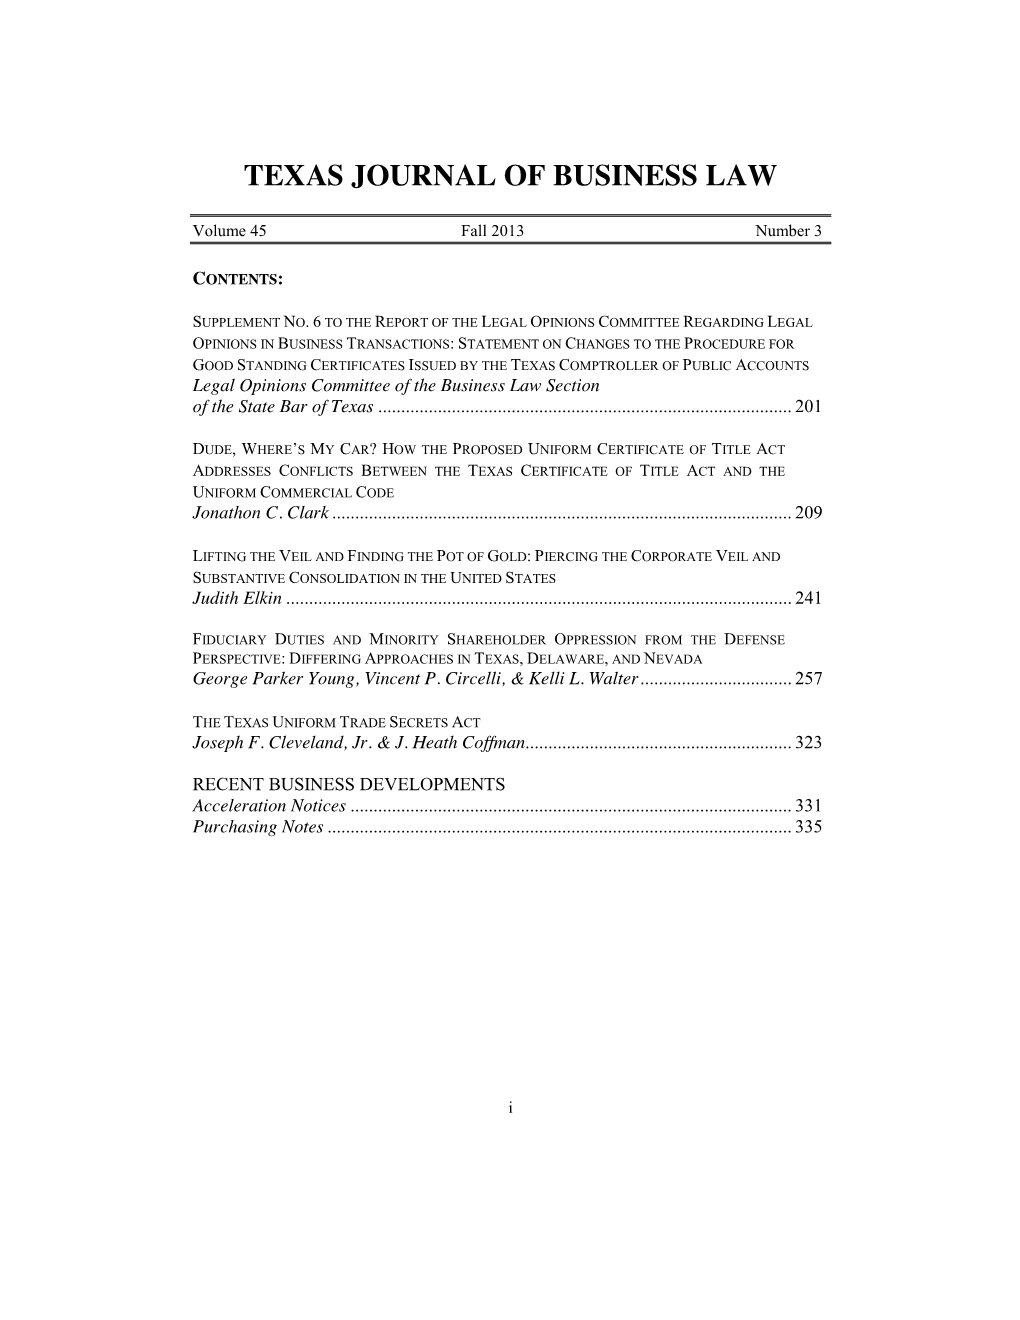 Texas Journal of Business Law